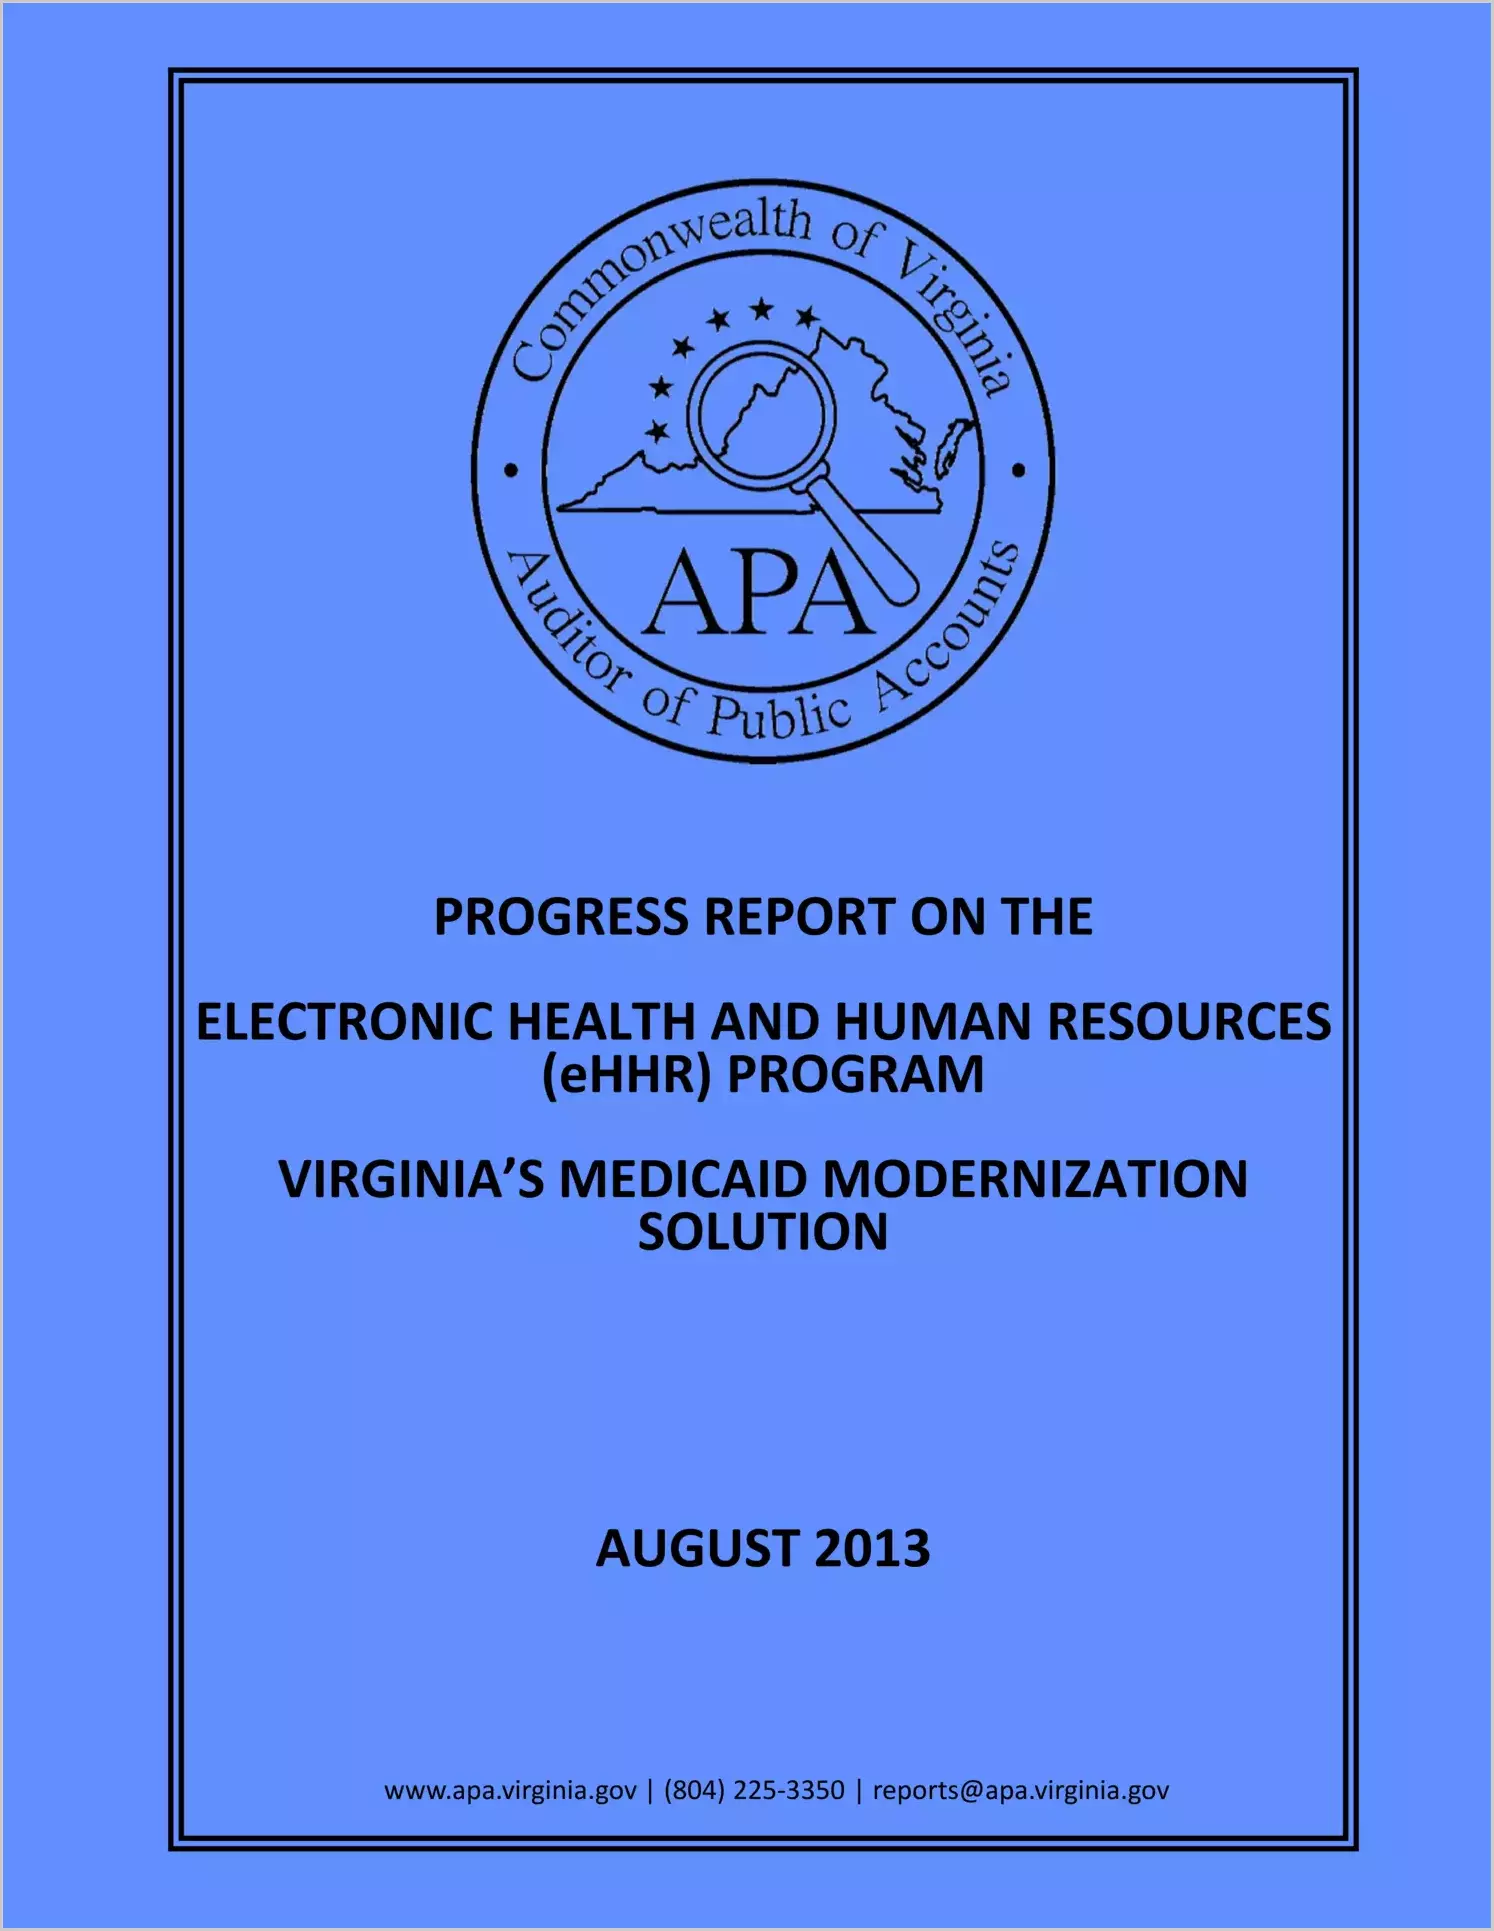 Electronic Health and Human Resources (eHHR) Program Virginia's Medicaid Modernization Solution as of August 2013